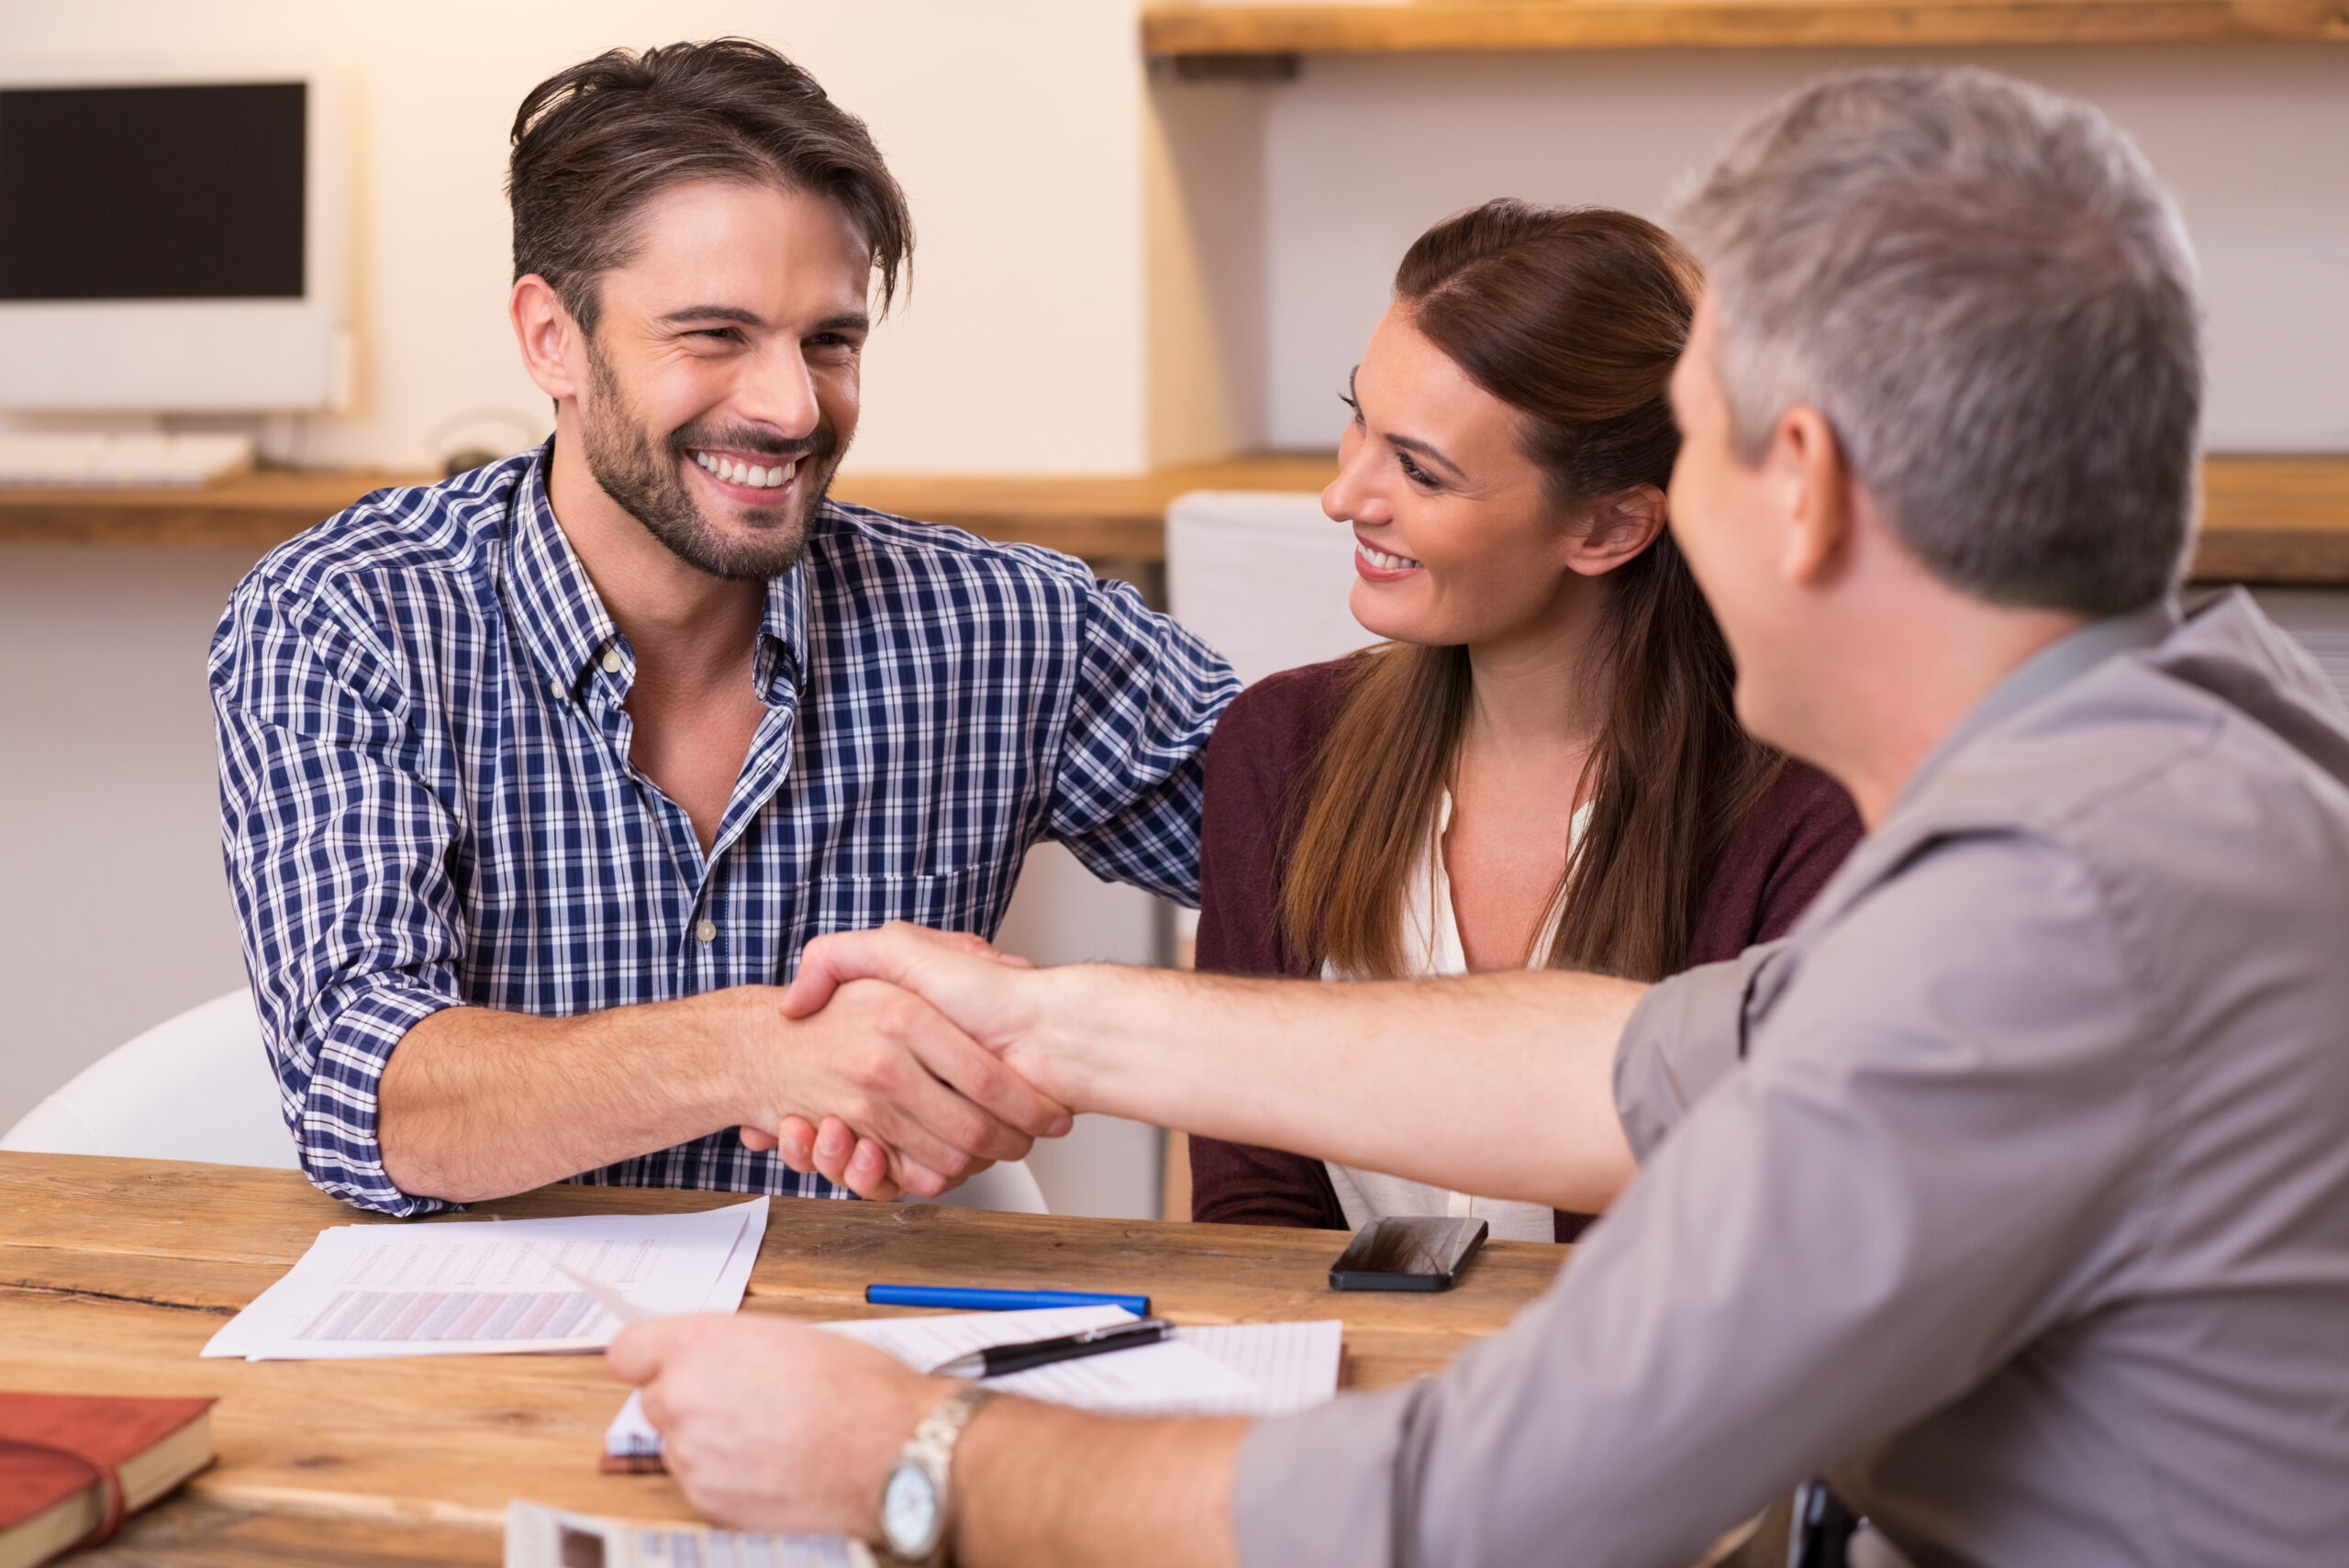 financial planner shaking hands with a man over paperwork